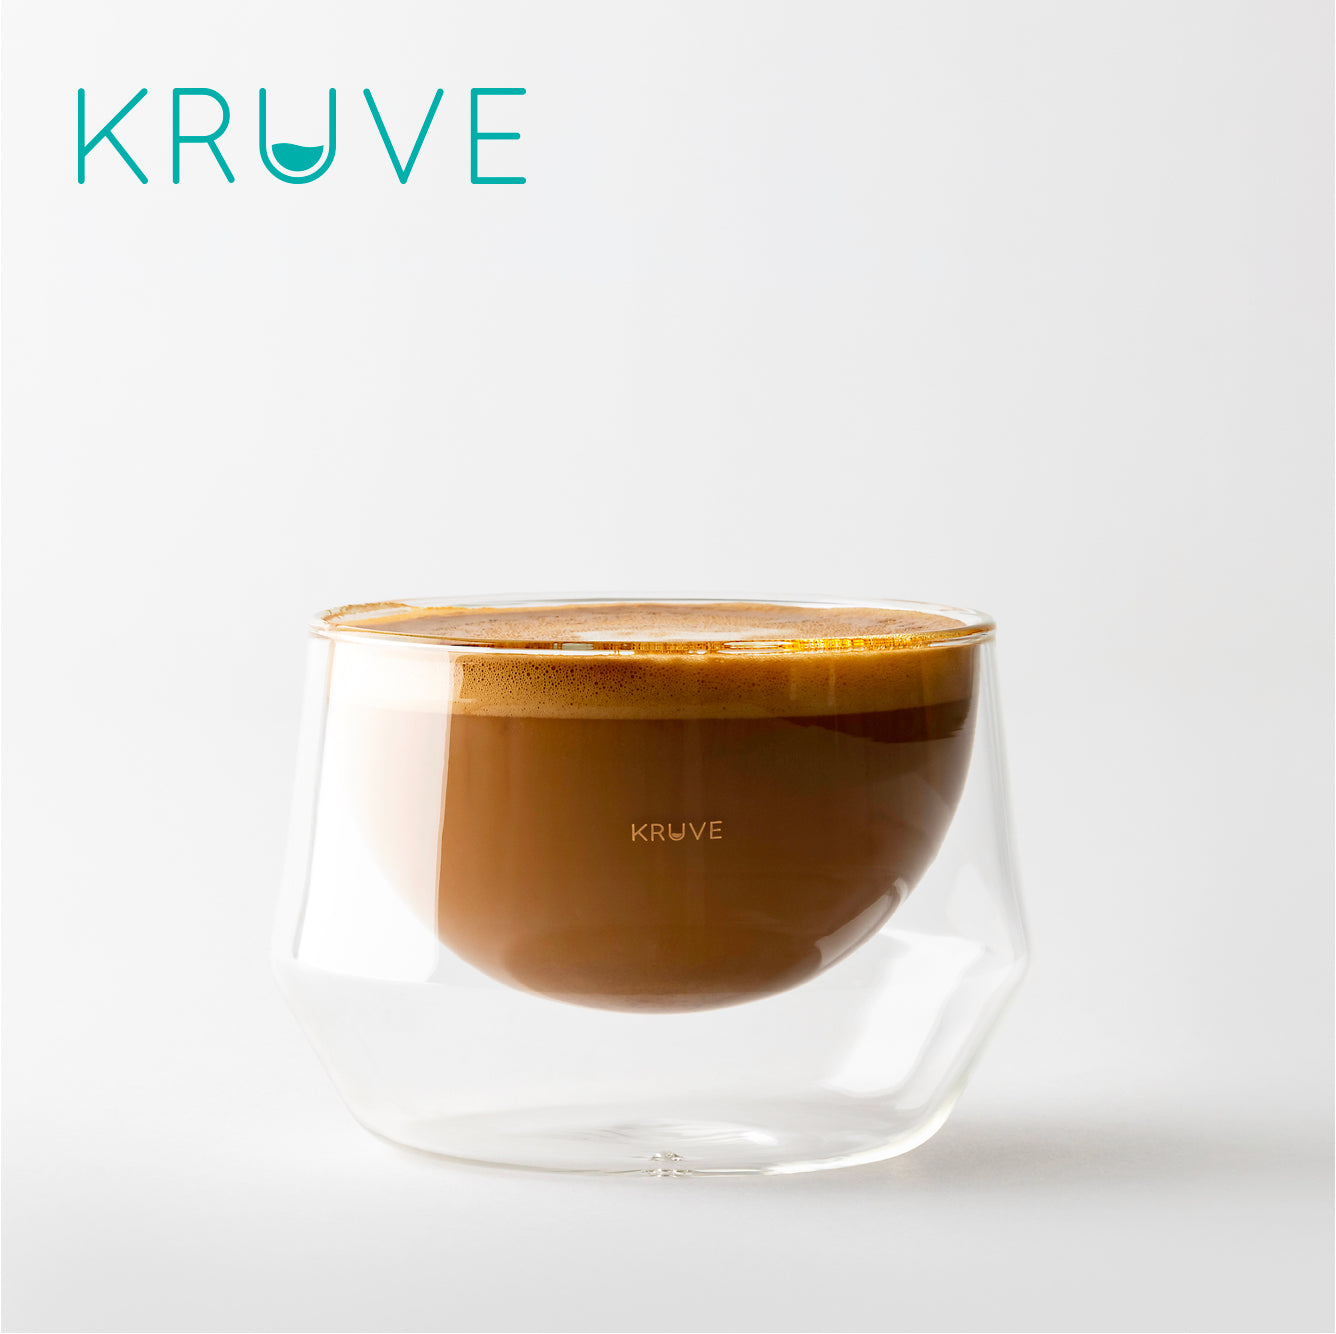 KRUVE - Stunning photo by @coffeecoulture of the Propel